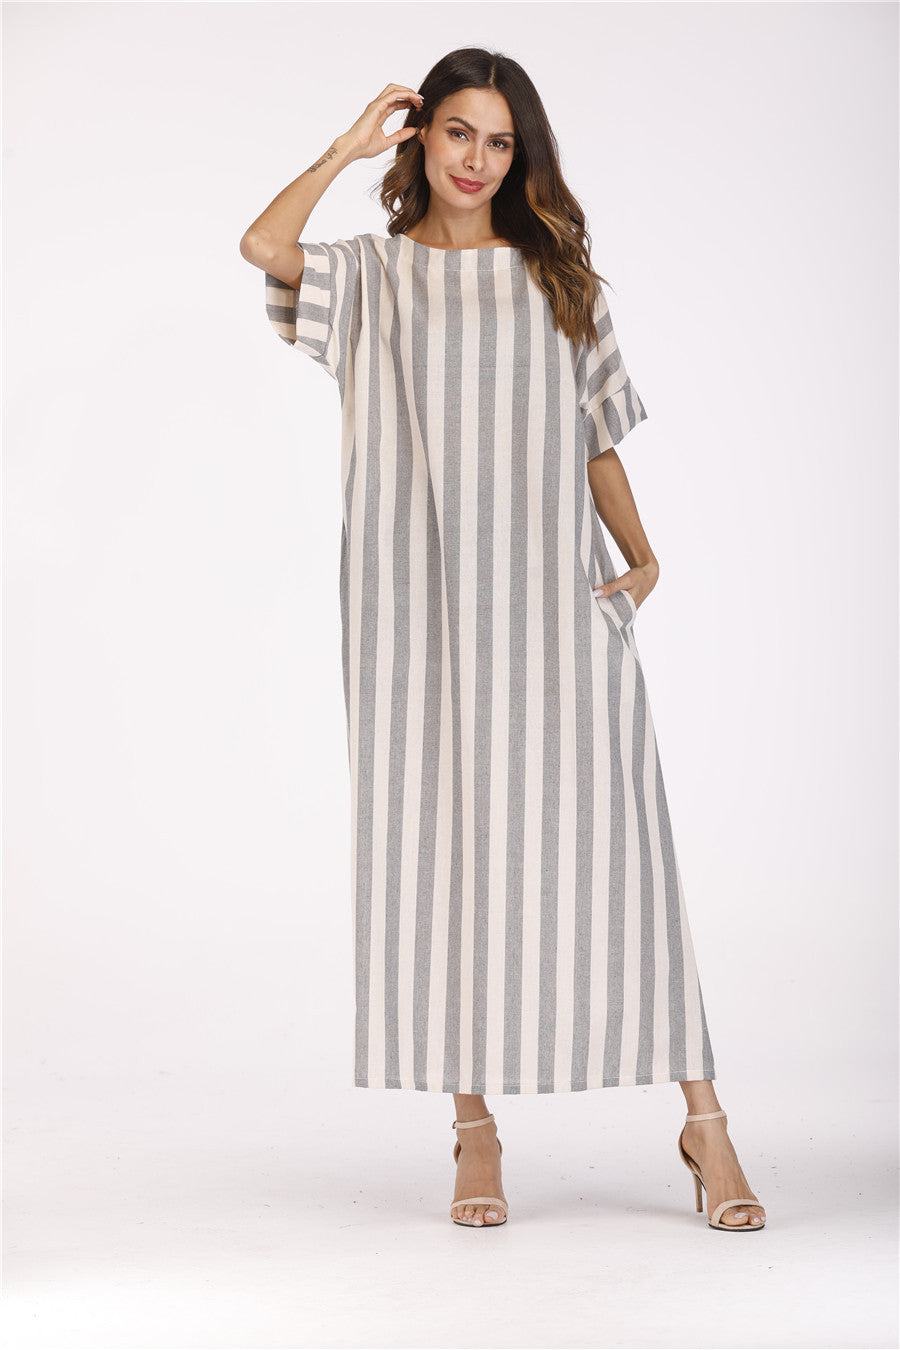 Striped cotton and linen dress